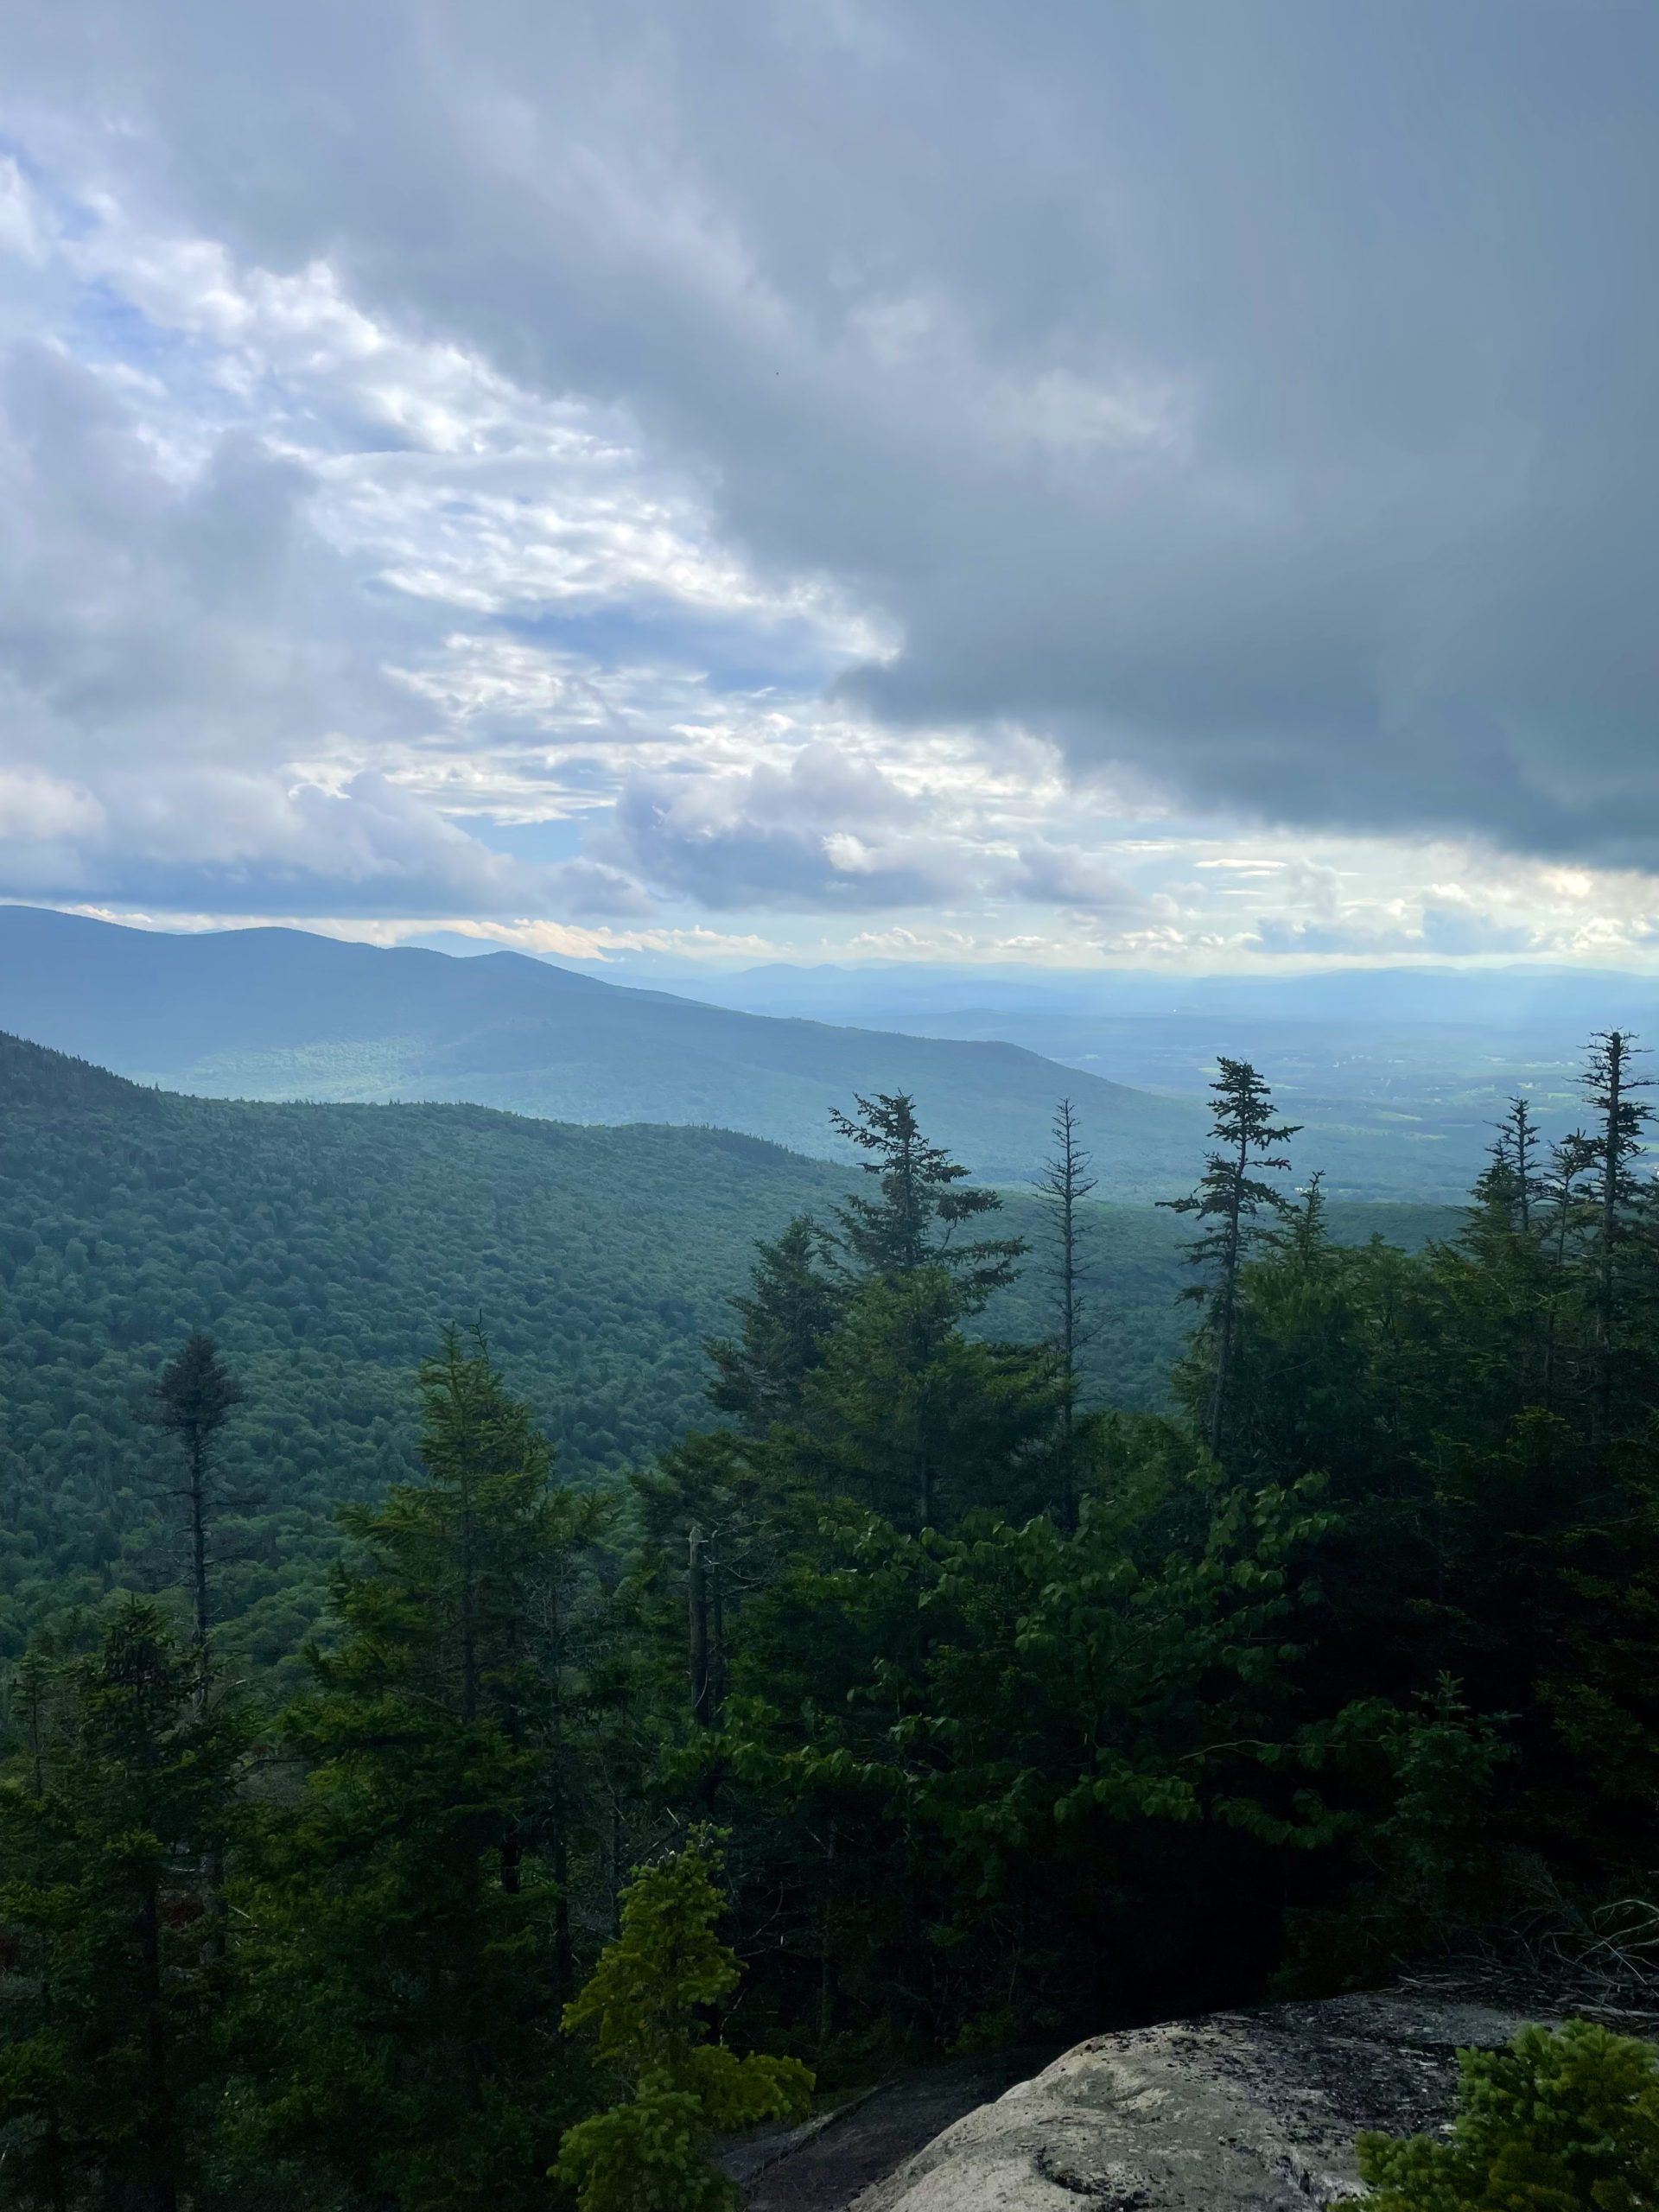 View seen while hiking Mt. Waumbek and Mt. Cabot in the White Mountain National Forest, New Hampshire